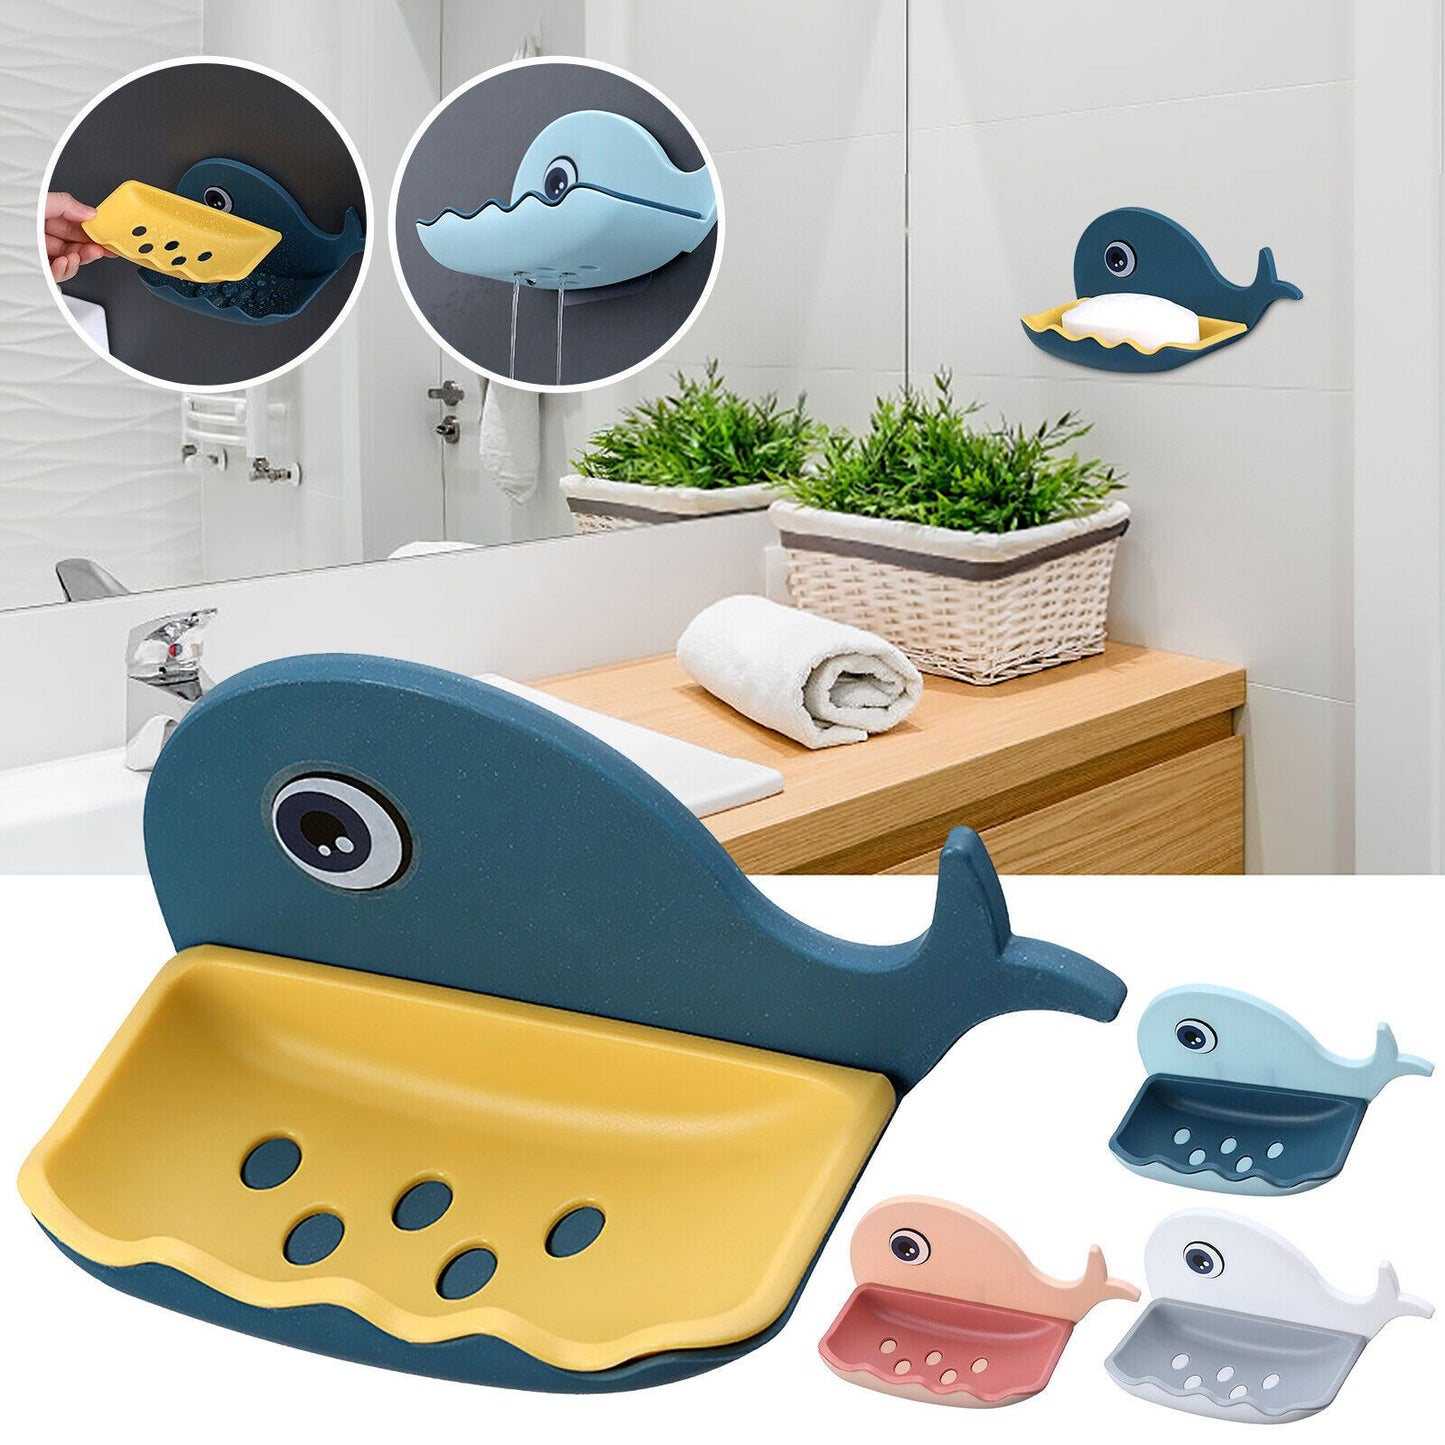 WHALE SHAPED SOAP HOLDER